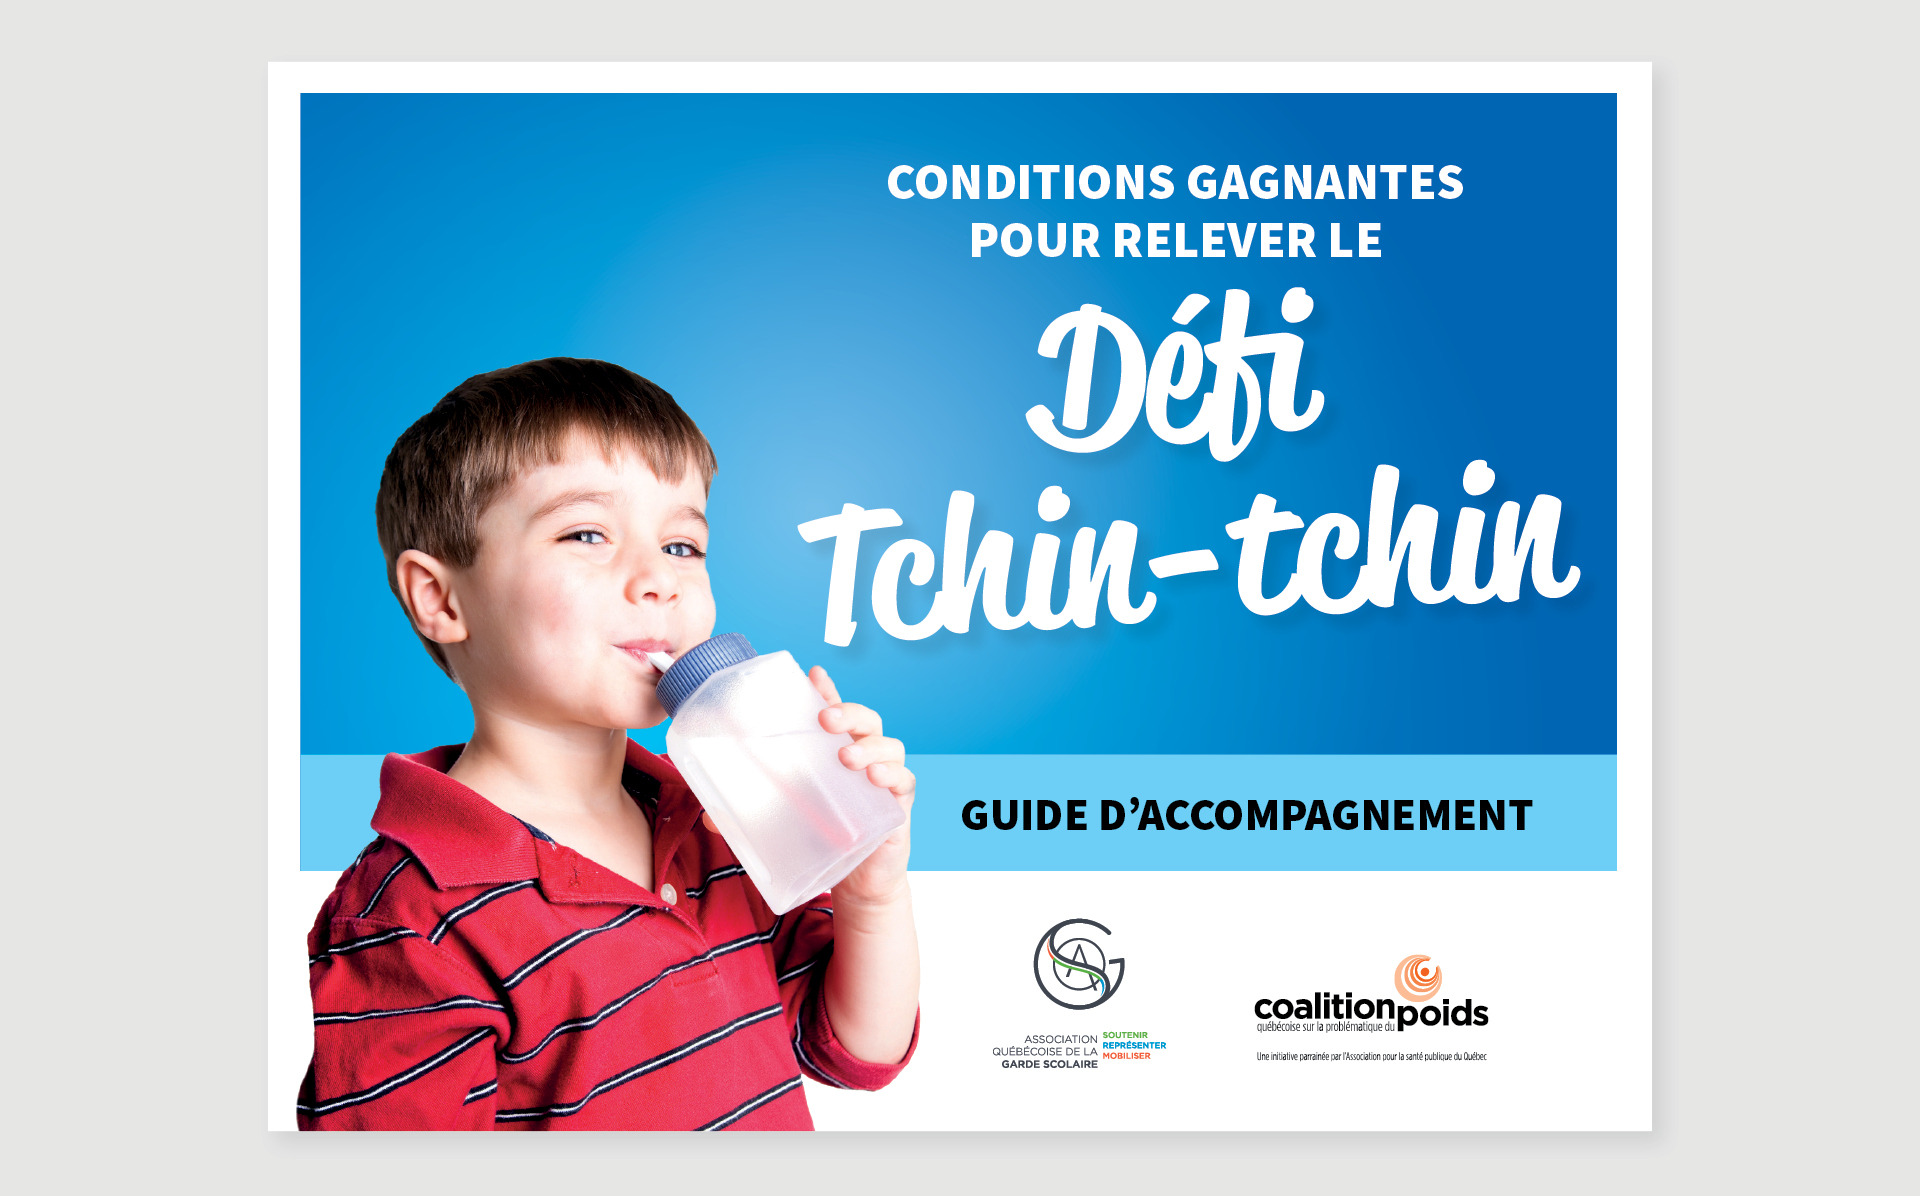 Guide d'accompagnement